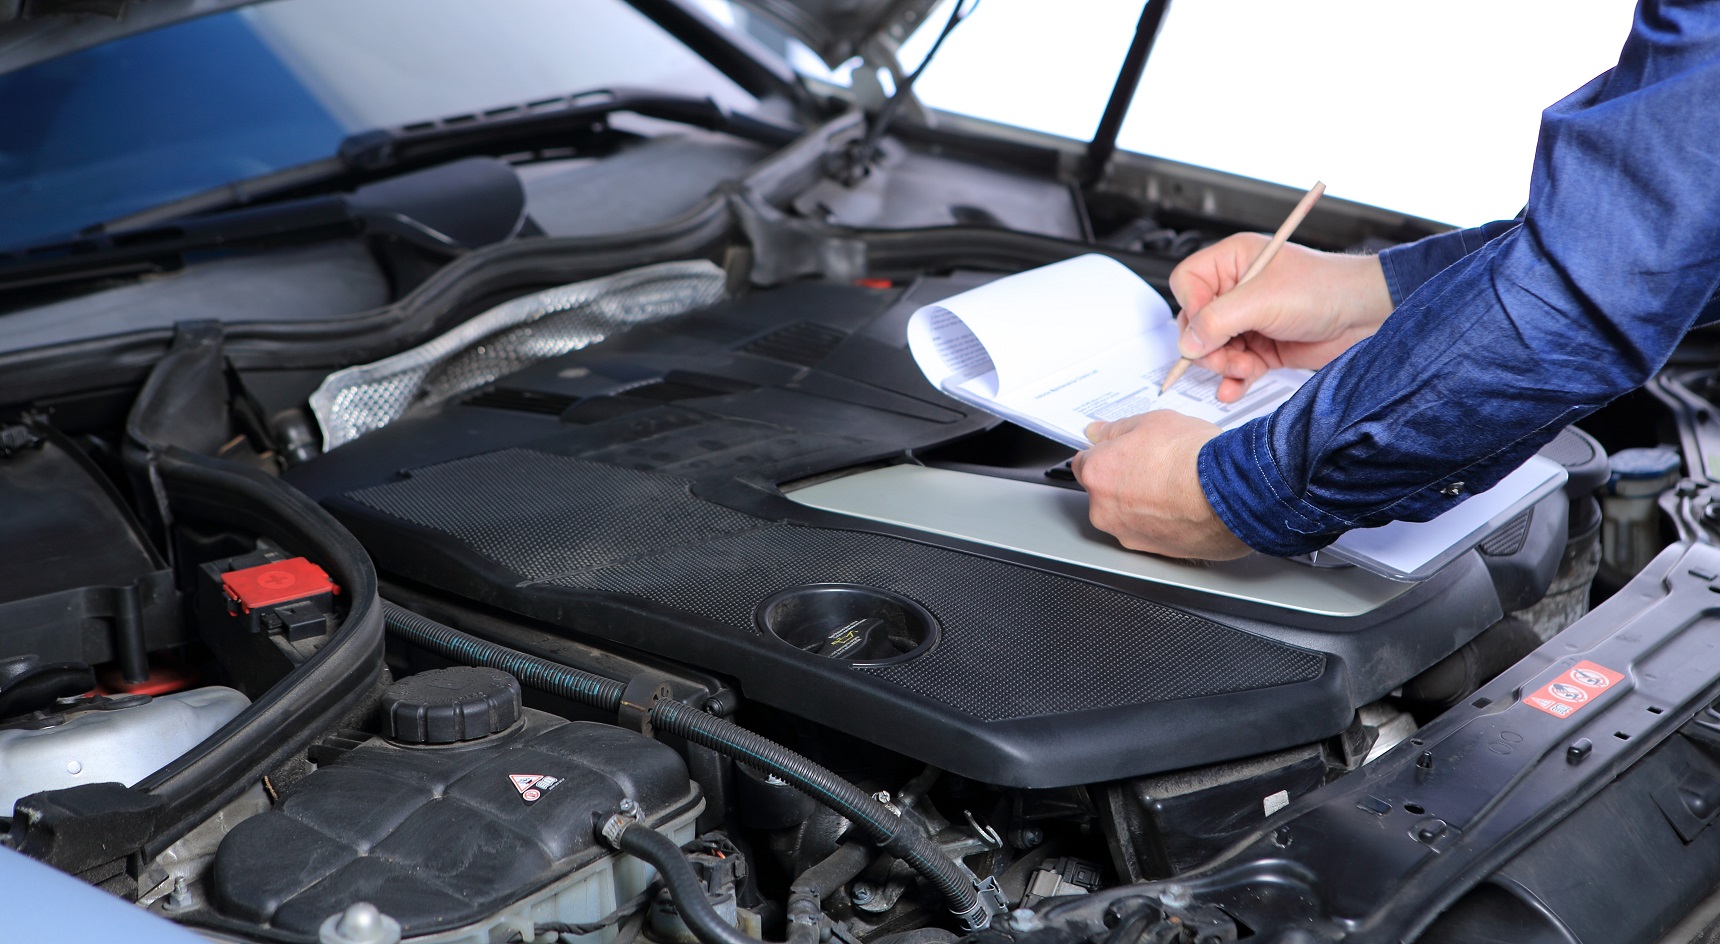 Budget for your services and stick to your car’s maintenance plan.